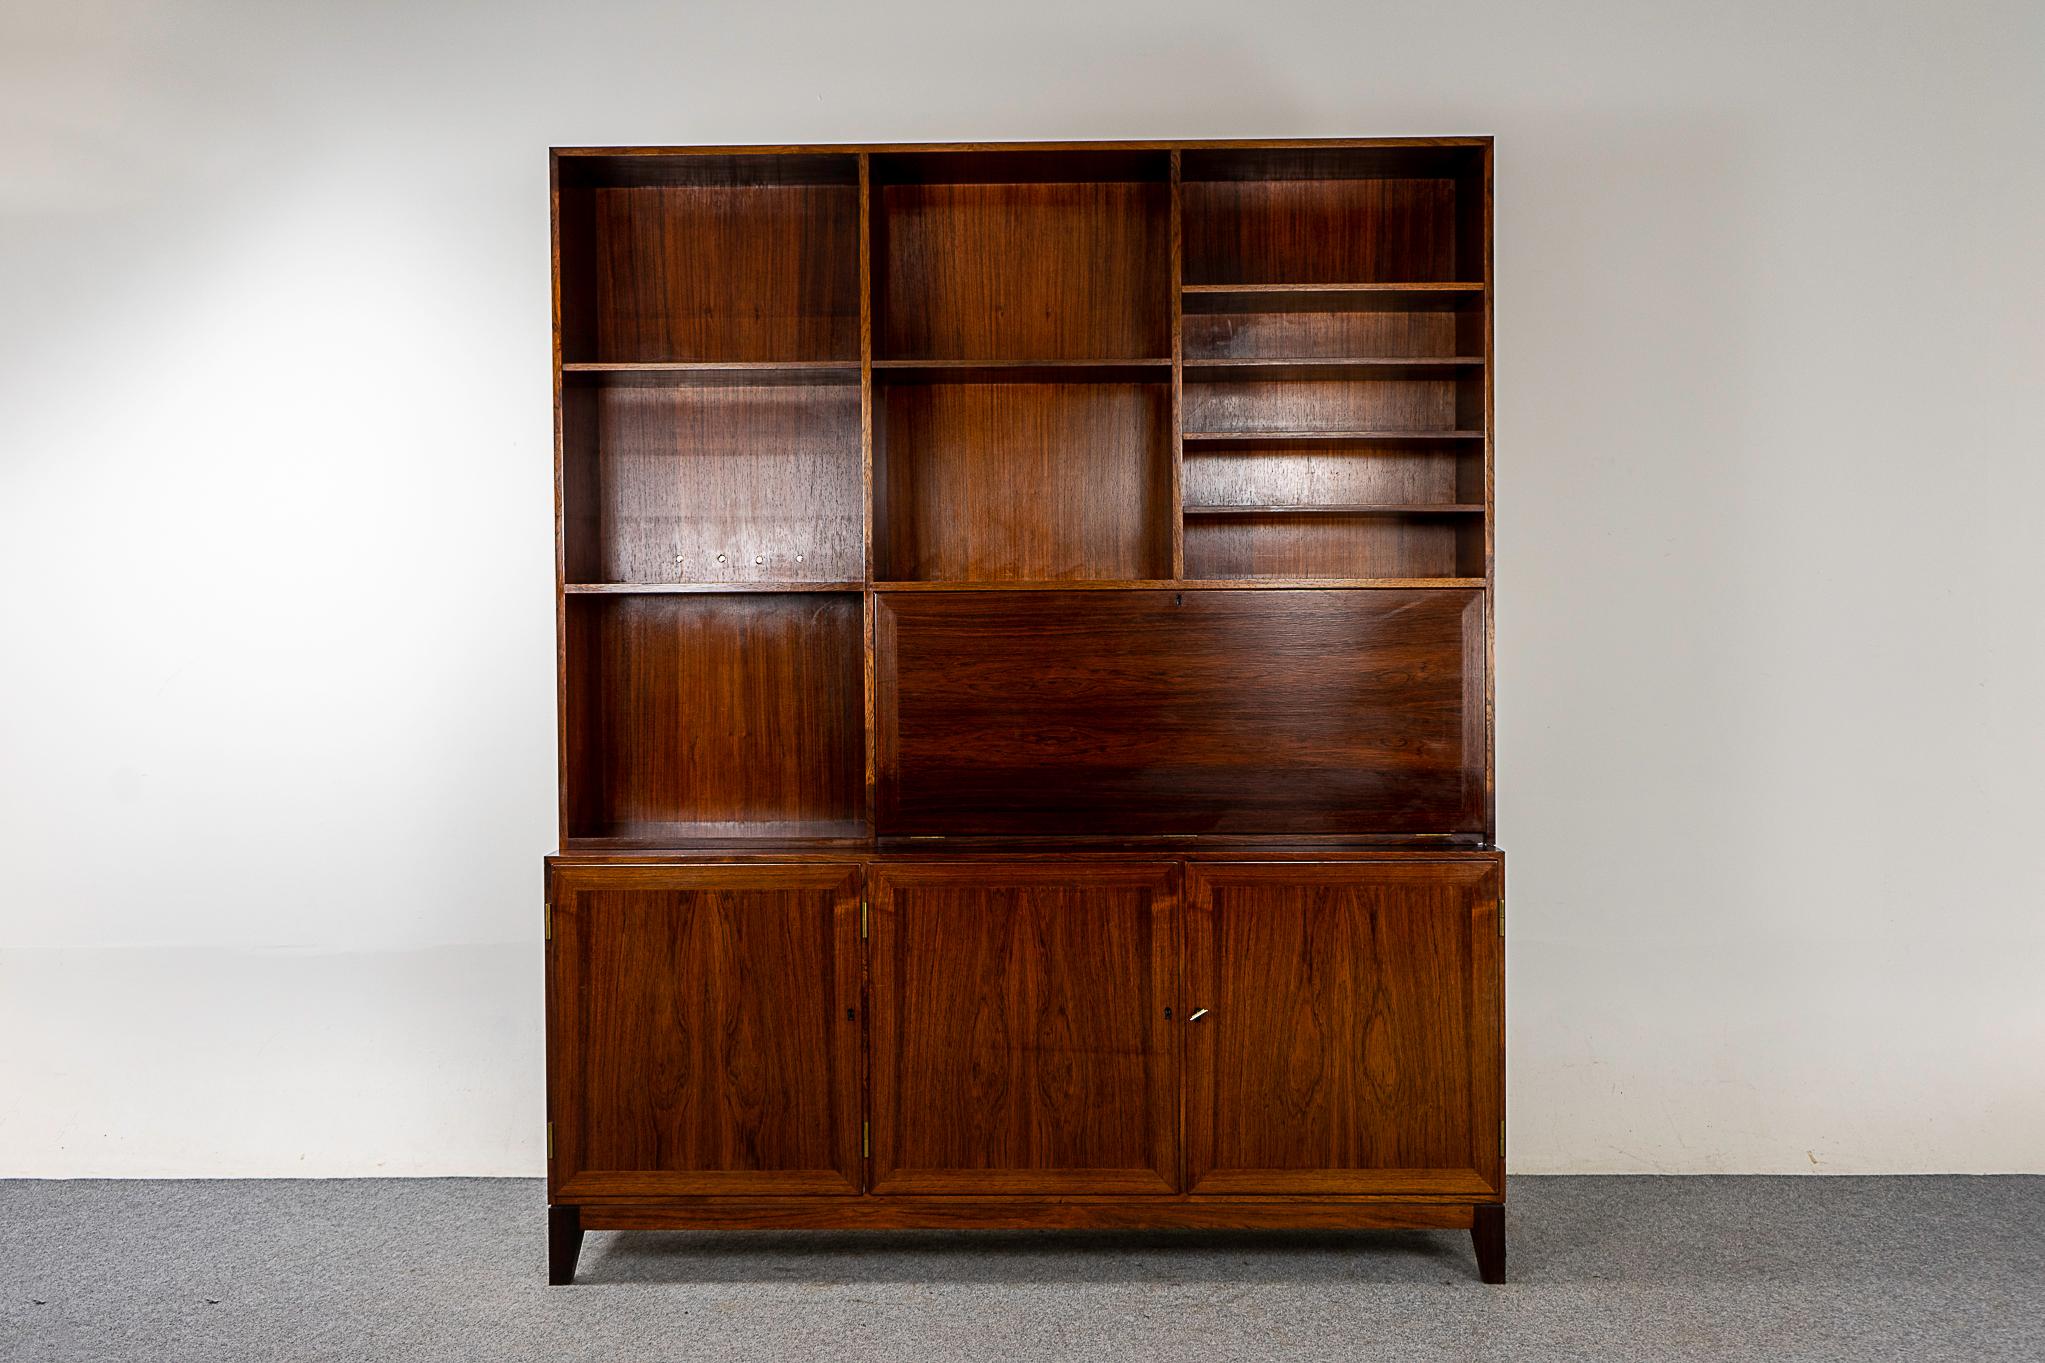 Danish rosewood bookcase cabinet by Kai Winding, circa 1960's. Highly functional design features open shelving, a drop down desk with fitted interior and lower storage with exterior doors. Danish Furniture Makers' control stamp intact.

Please